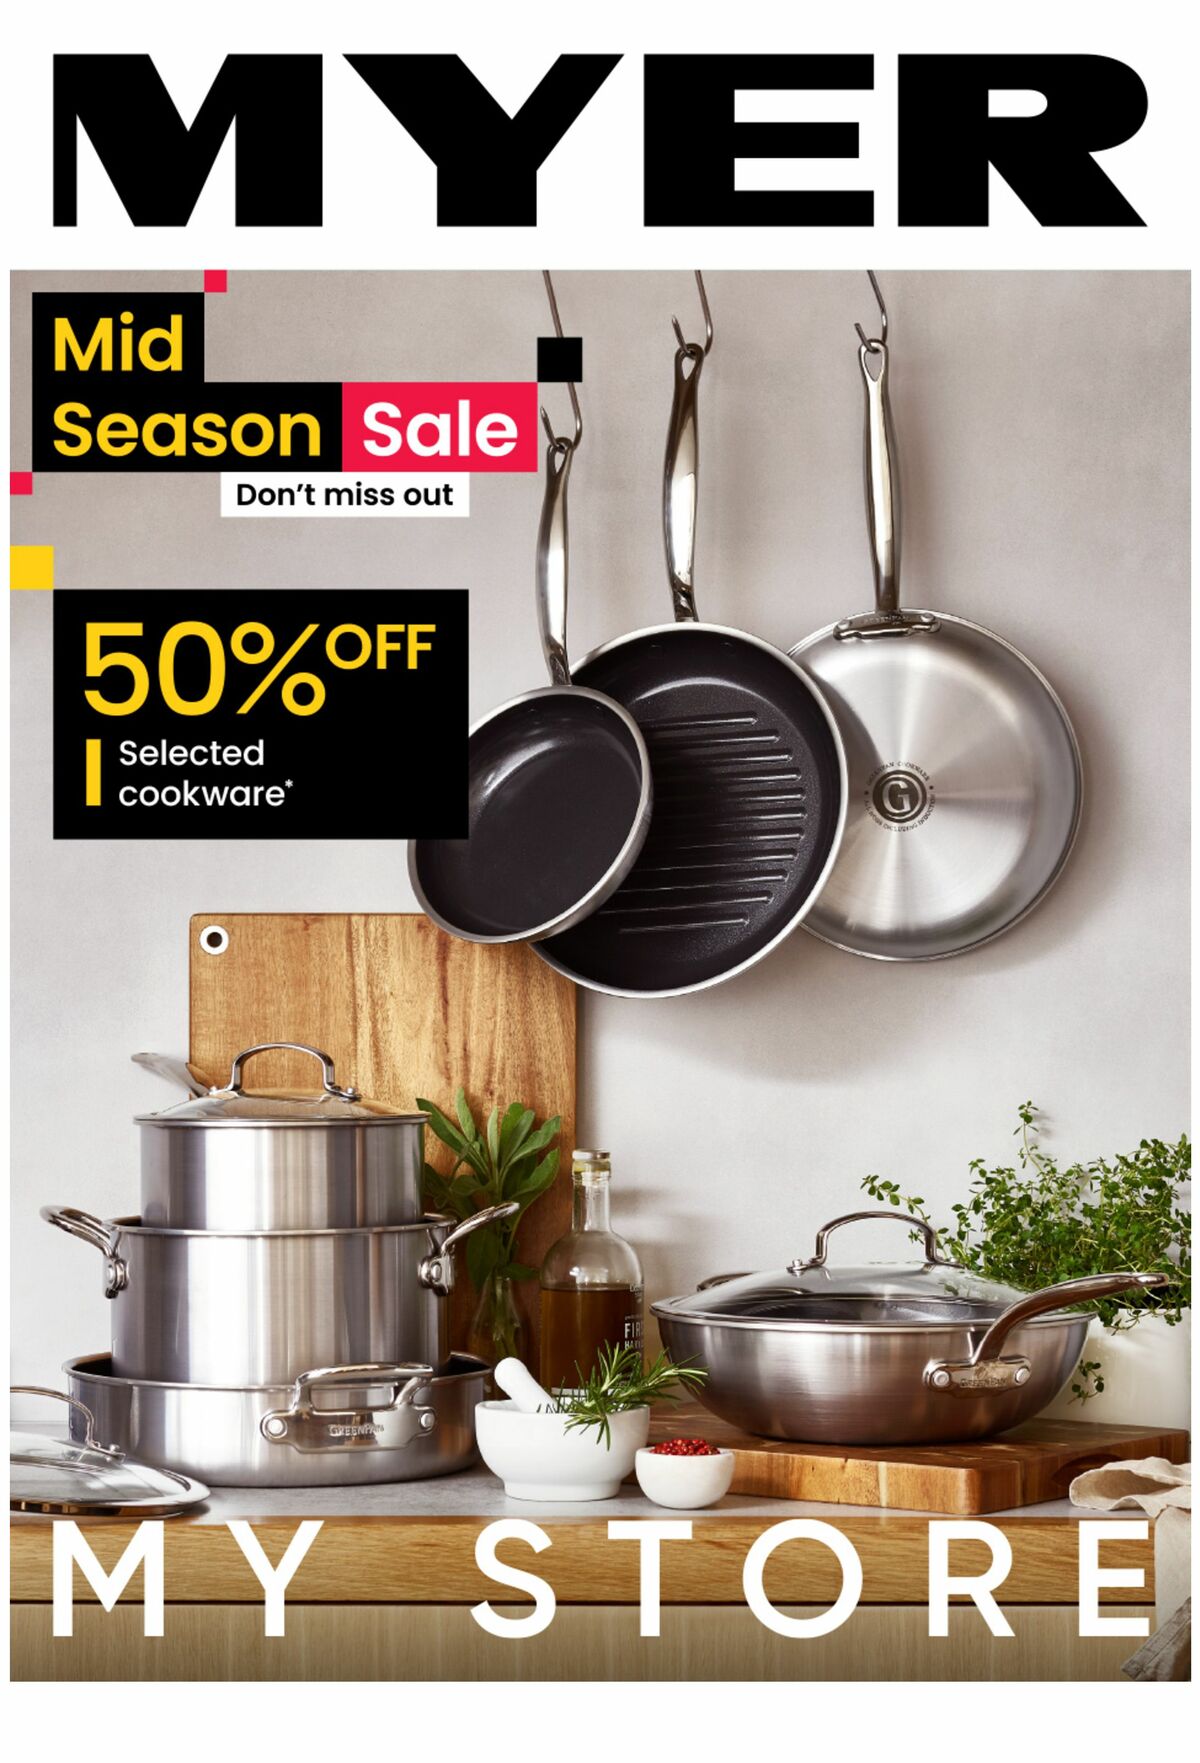 Myer Mid Season Sale Hardgoods Catalogues from 14 September